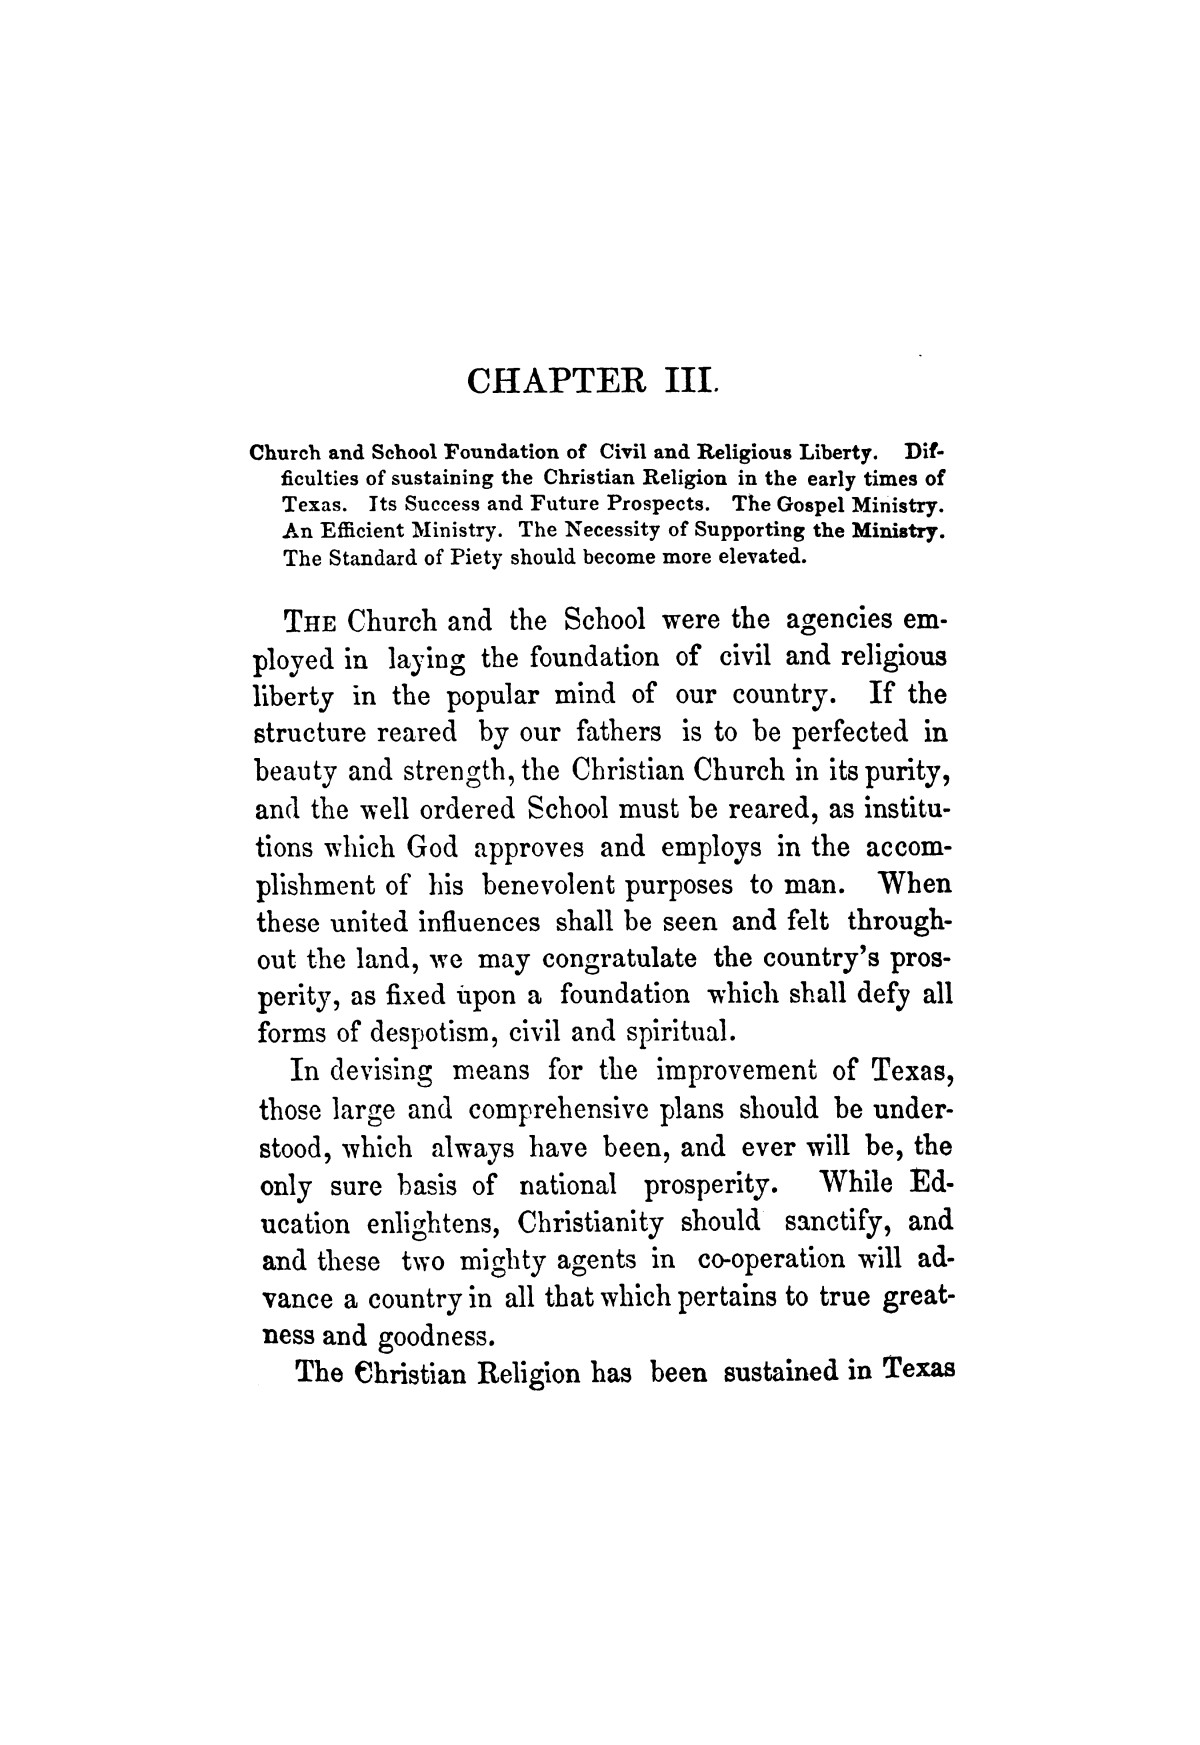 Texas in 1850. By Melinda Rankin.
                                                
                                                    [Sequence #]: 28 of 196
                                                